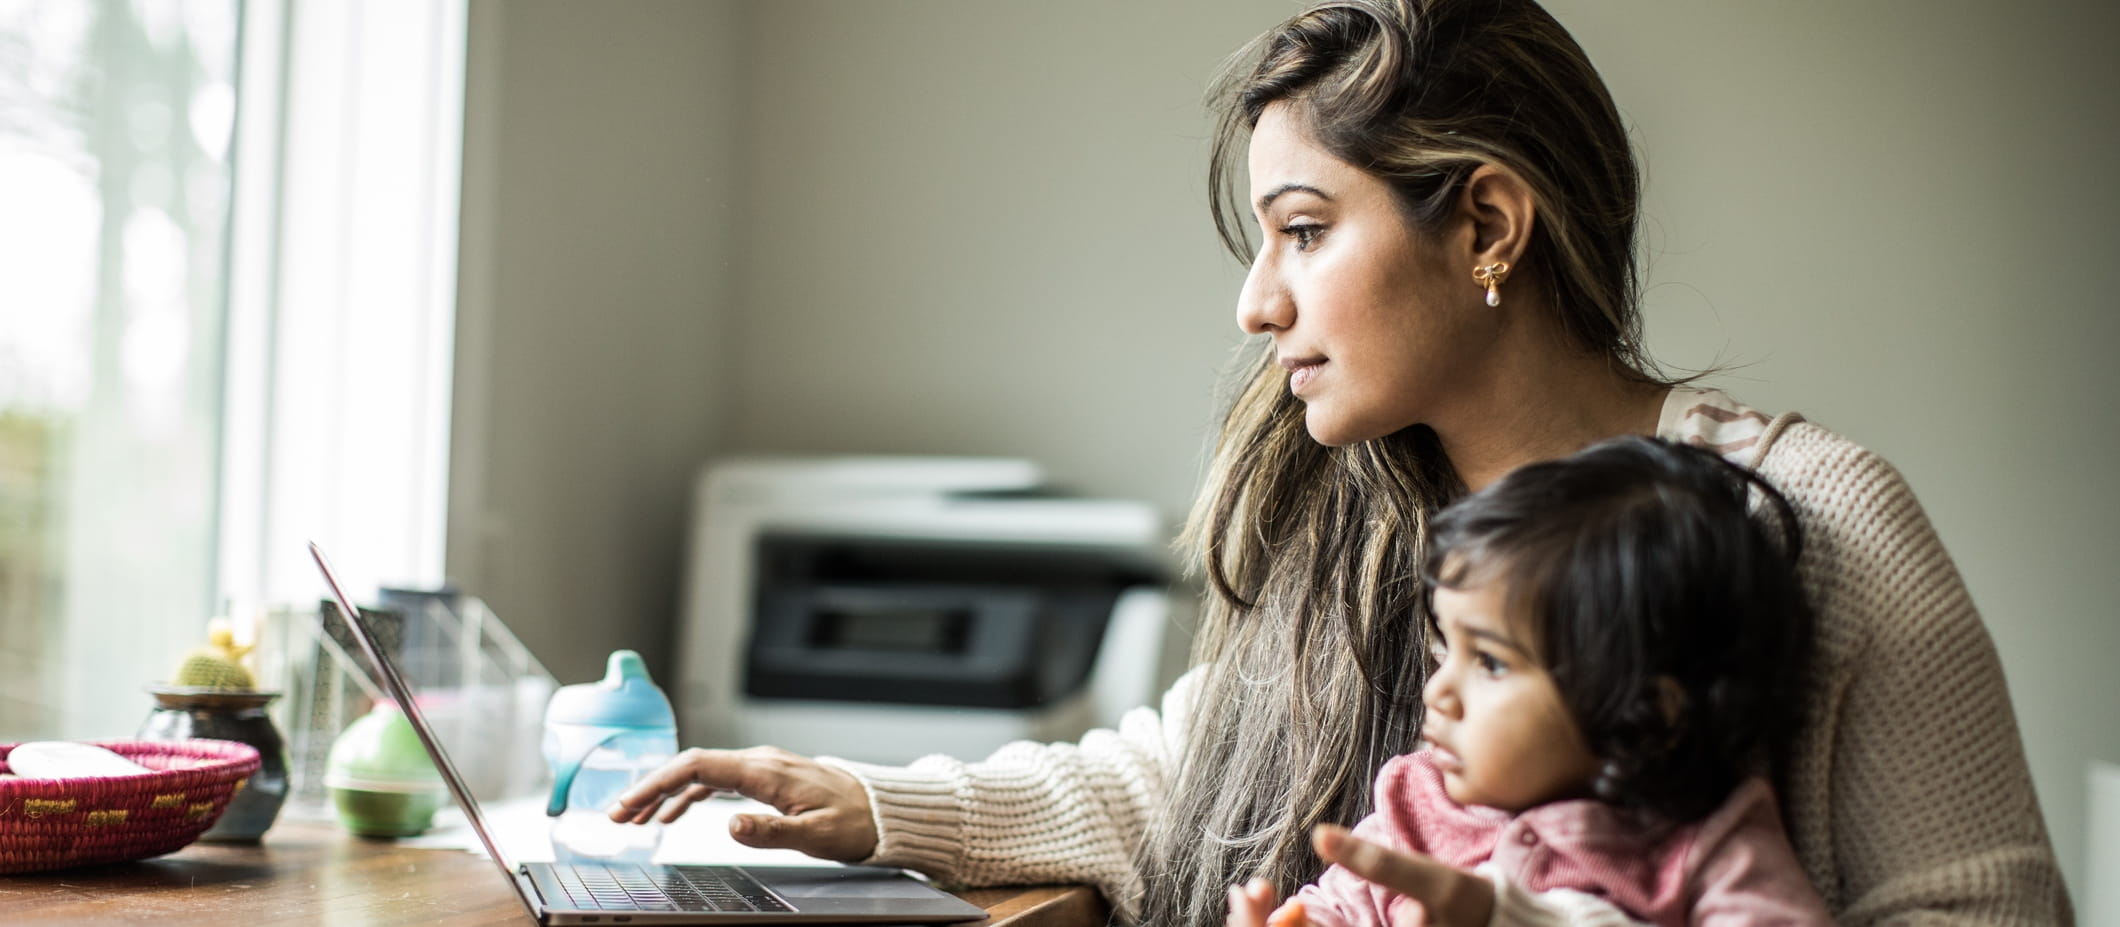 mother sitting with young child looking on a computer